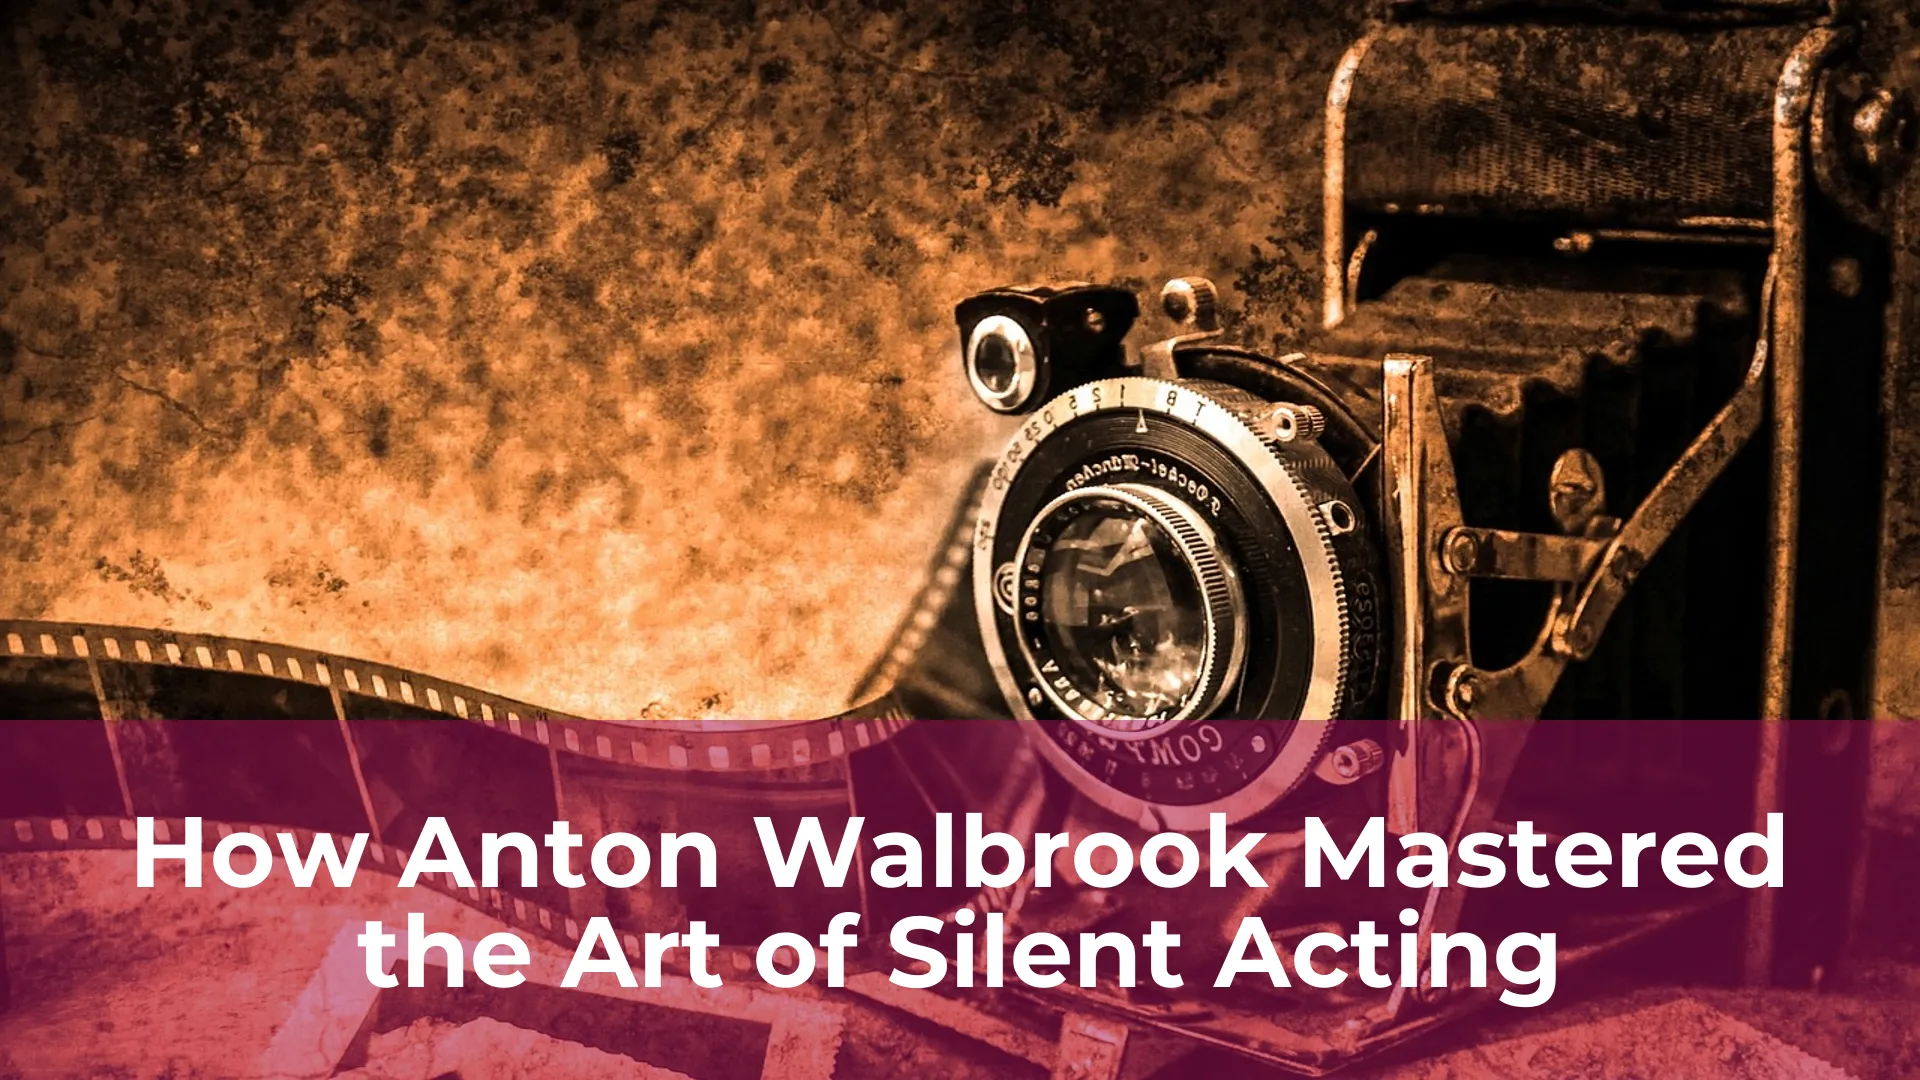 How anton walbrook mastered the art of silent acting